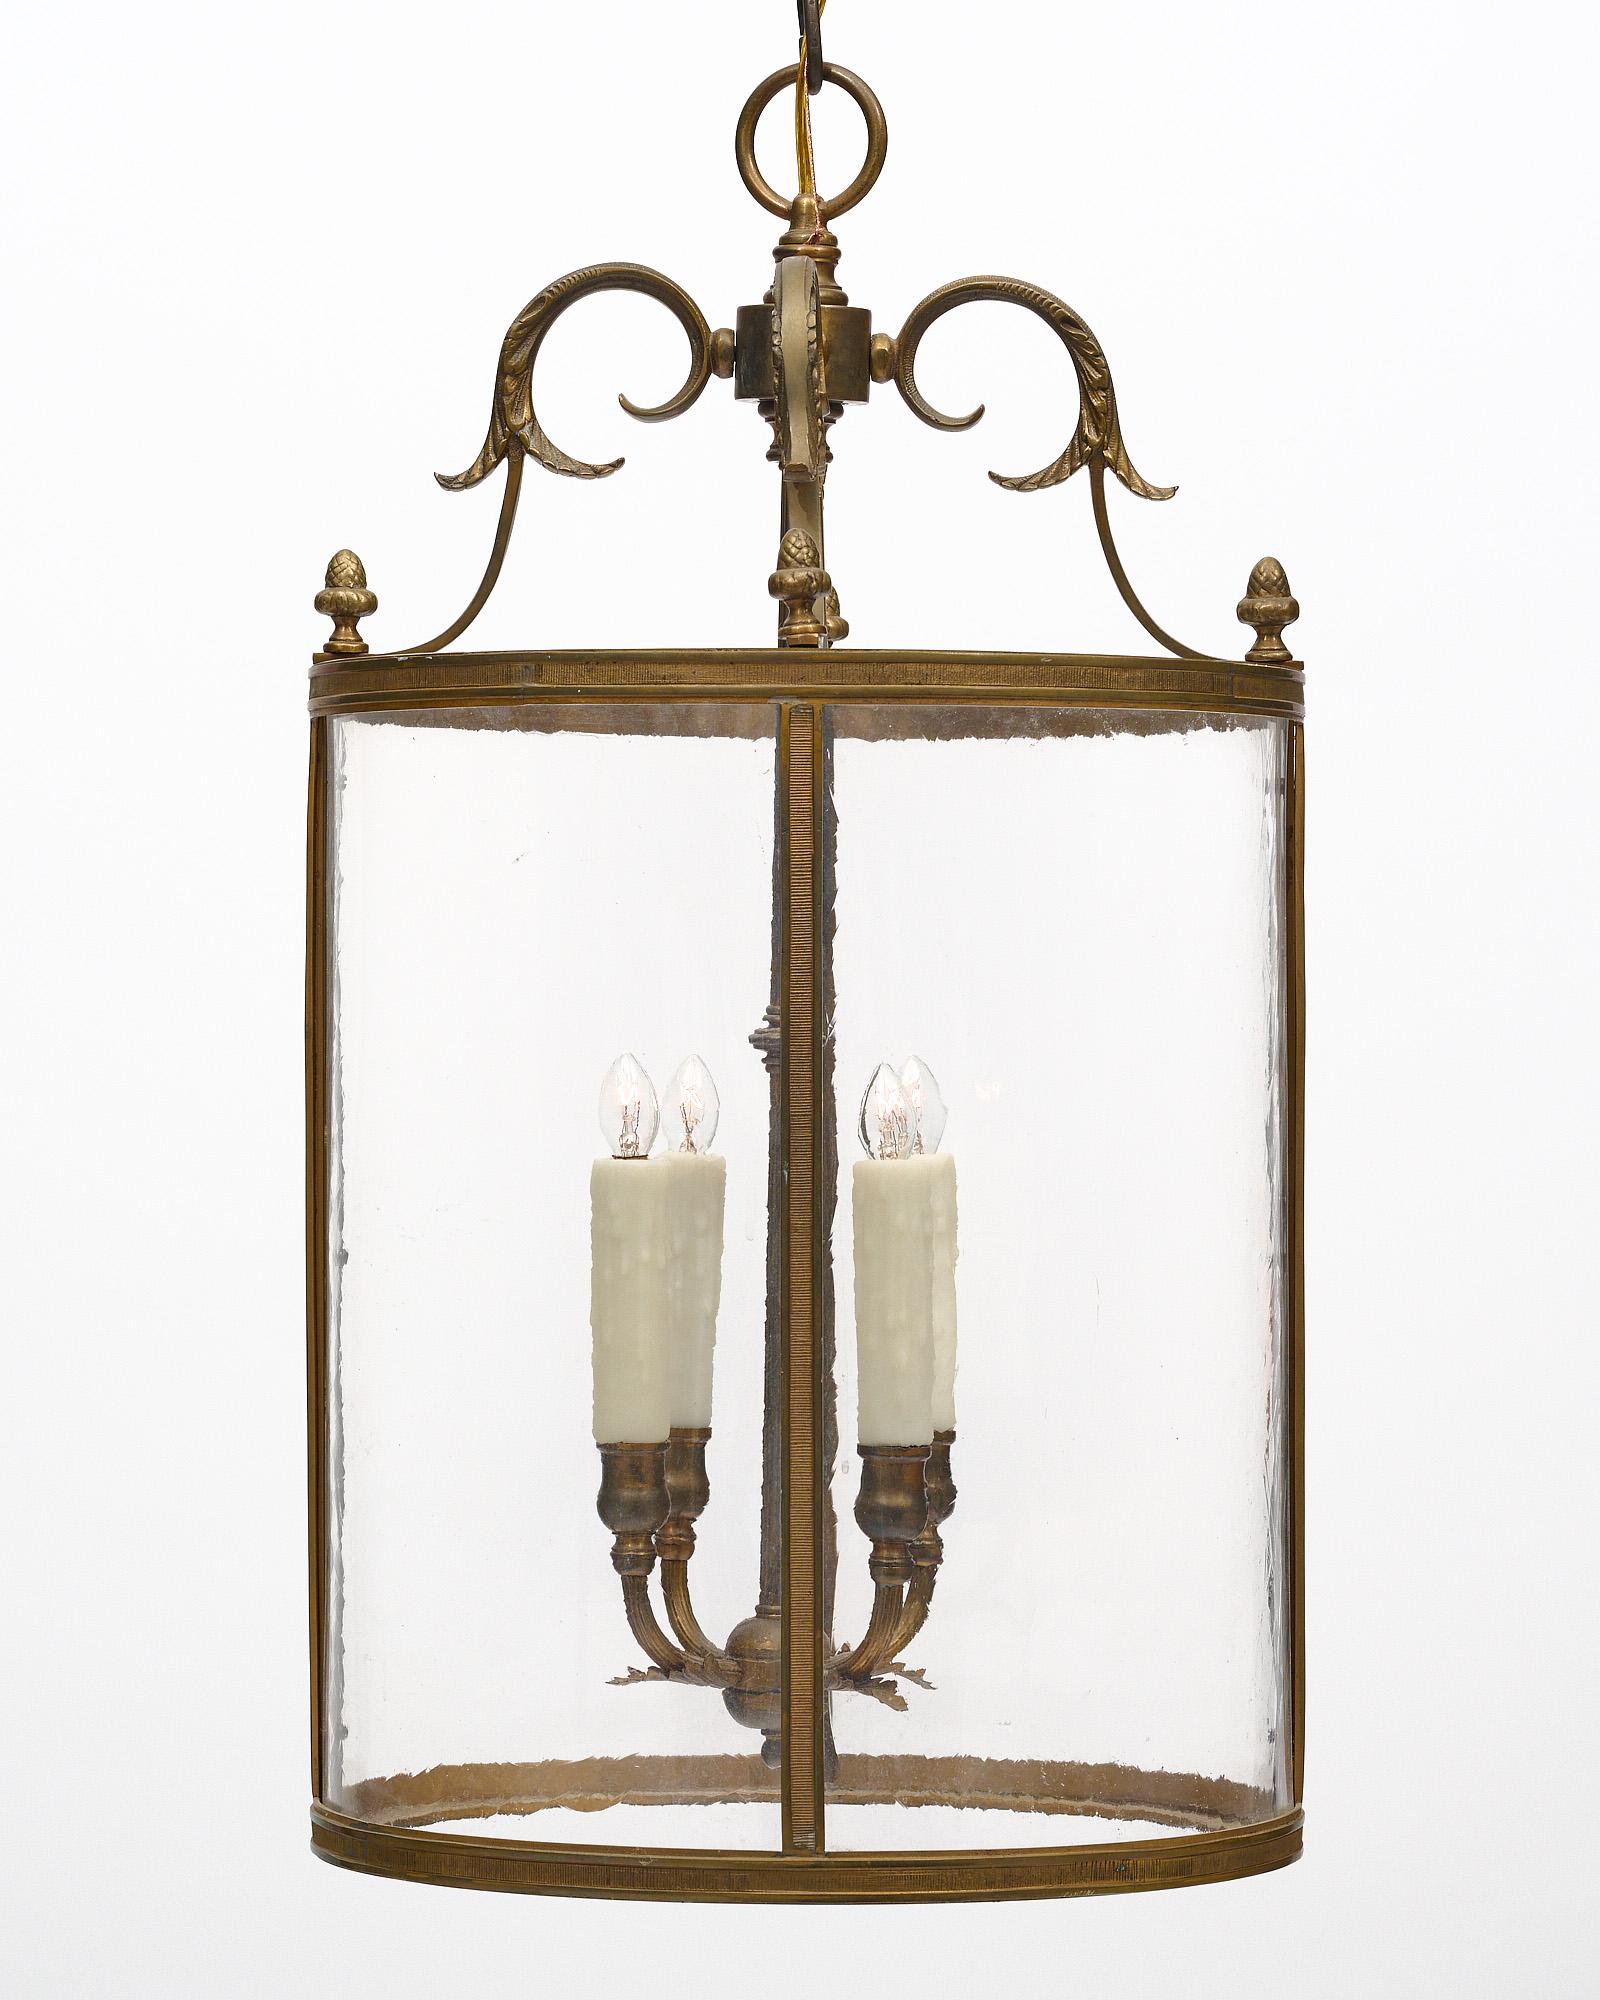 Lantern from France with a bronze structure and curved glass panes. The fixture is adorned with stylized acorn finials and acanthus leaves. There are four candelabras. It has been newly wired to fit US standards.
The current overall height from